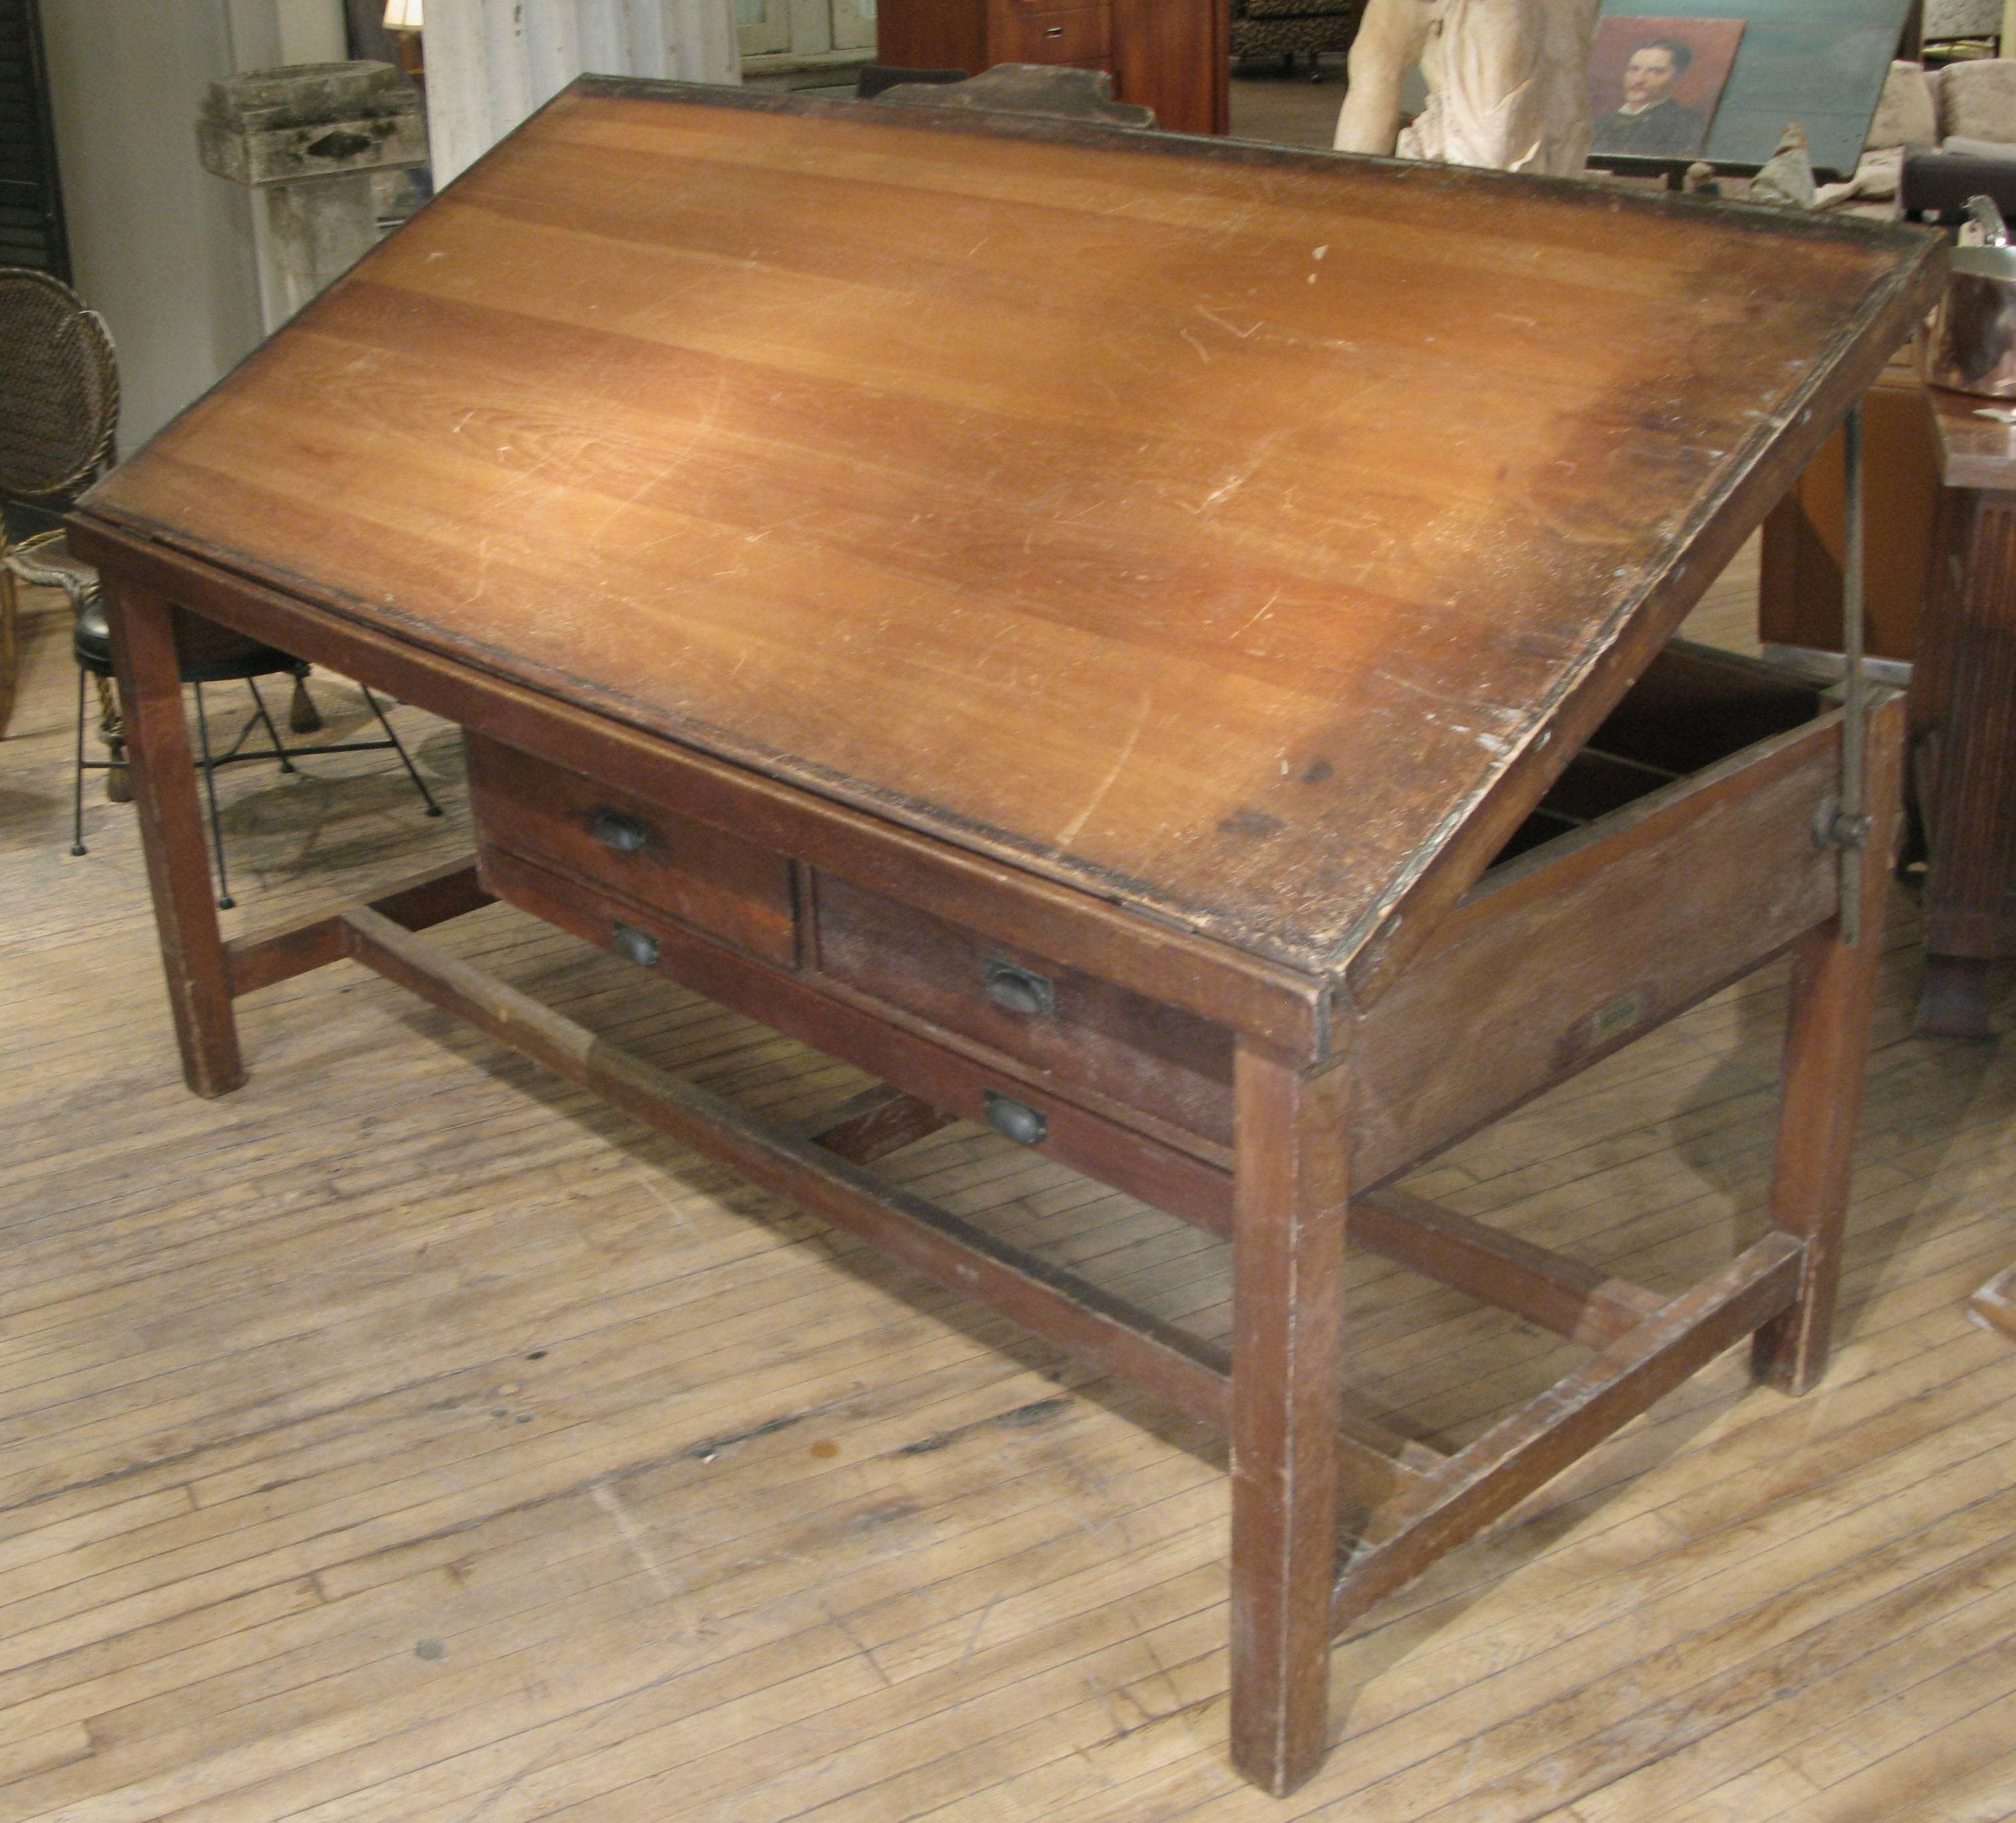 A very handsome large antique drafting desk with a tilt adjustable top, two large storage drawers and a wide drawer for drawings. Also has brackets mounted on the back for holding rolled architects plans. Also has removable block height adjusters